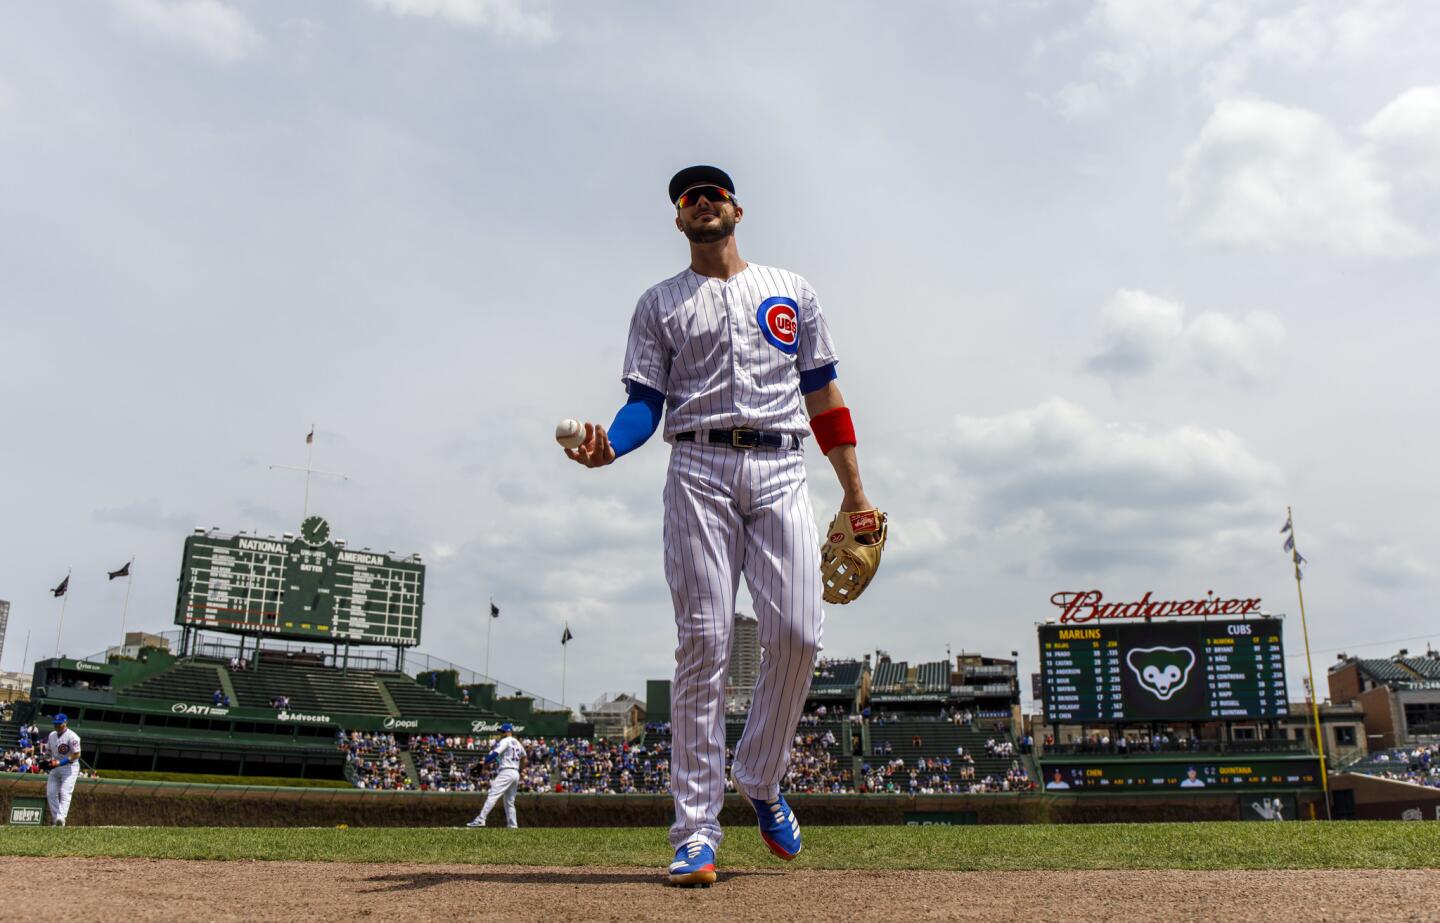 Cubs third baseman Kris Bryant tosses a ball to a fan before a game Wednesday, May 9, 2018 at Wrigley Field.